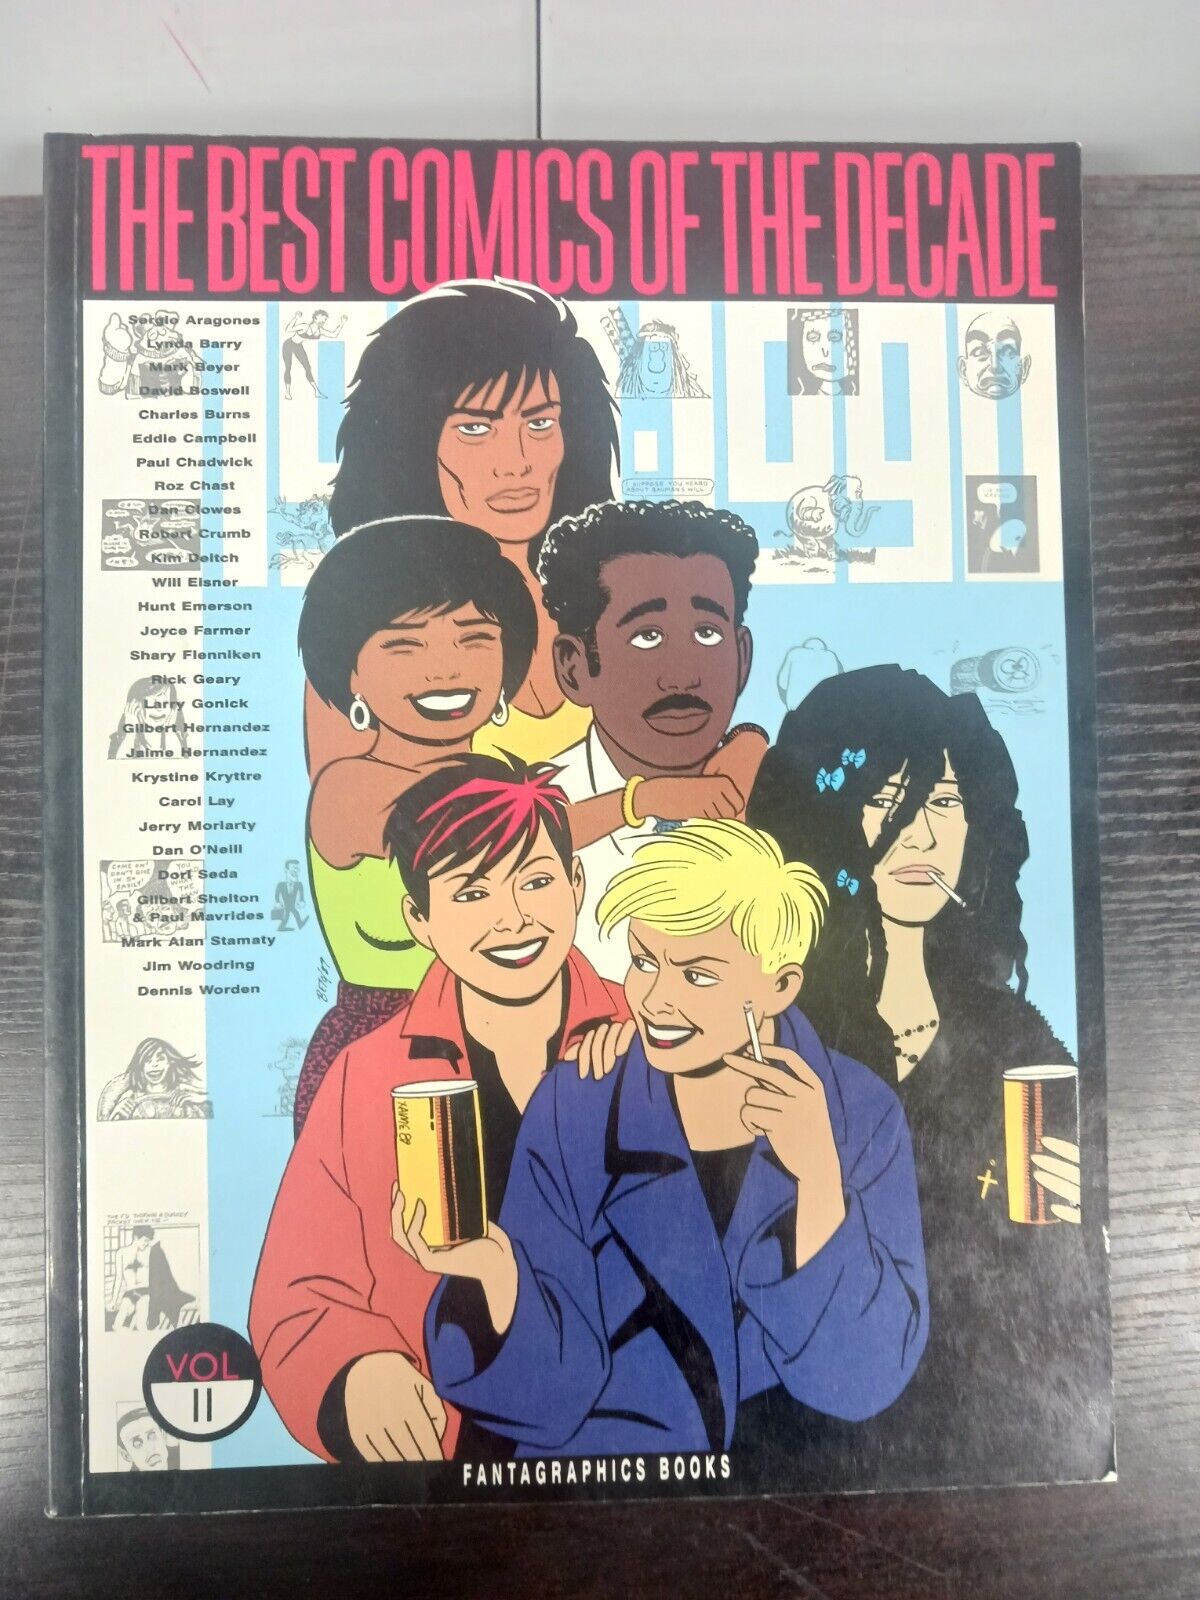 The Best Comics of the Decade #2 (Fantagraphics Books July 1990)